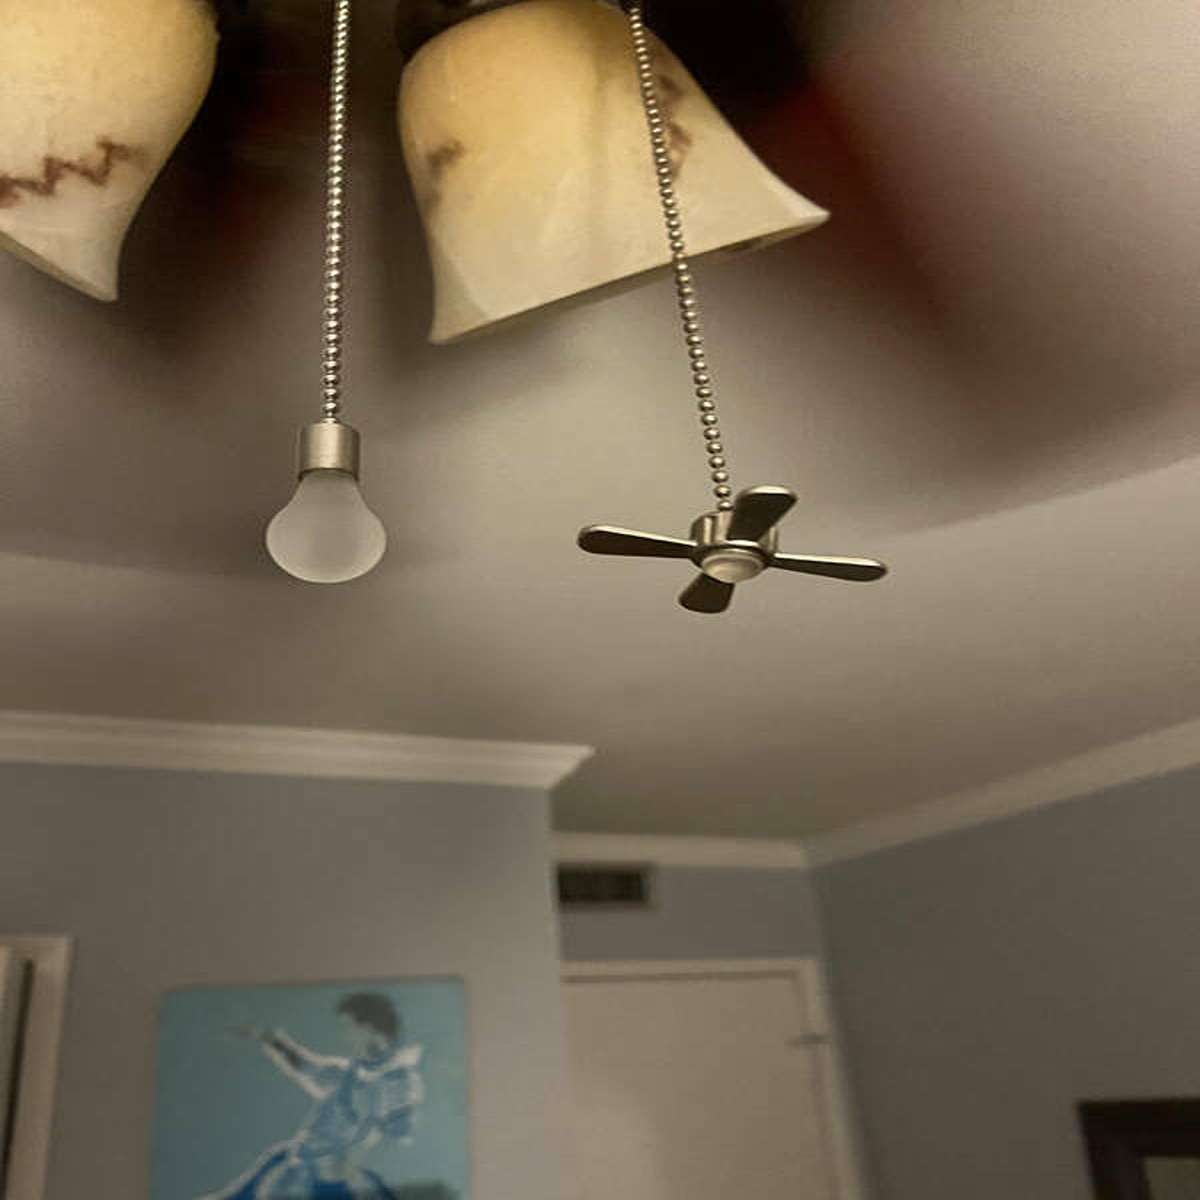 Fan pull chains that have a light bulb and fan blades at the end to indicate which chain to pull.